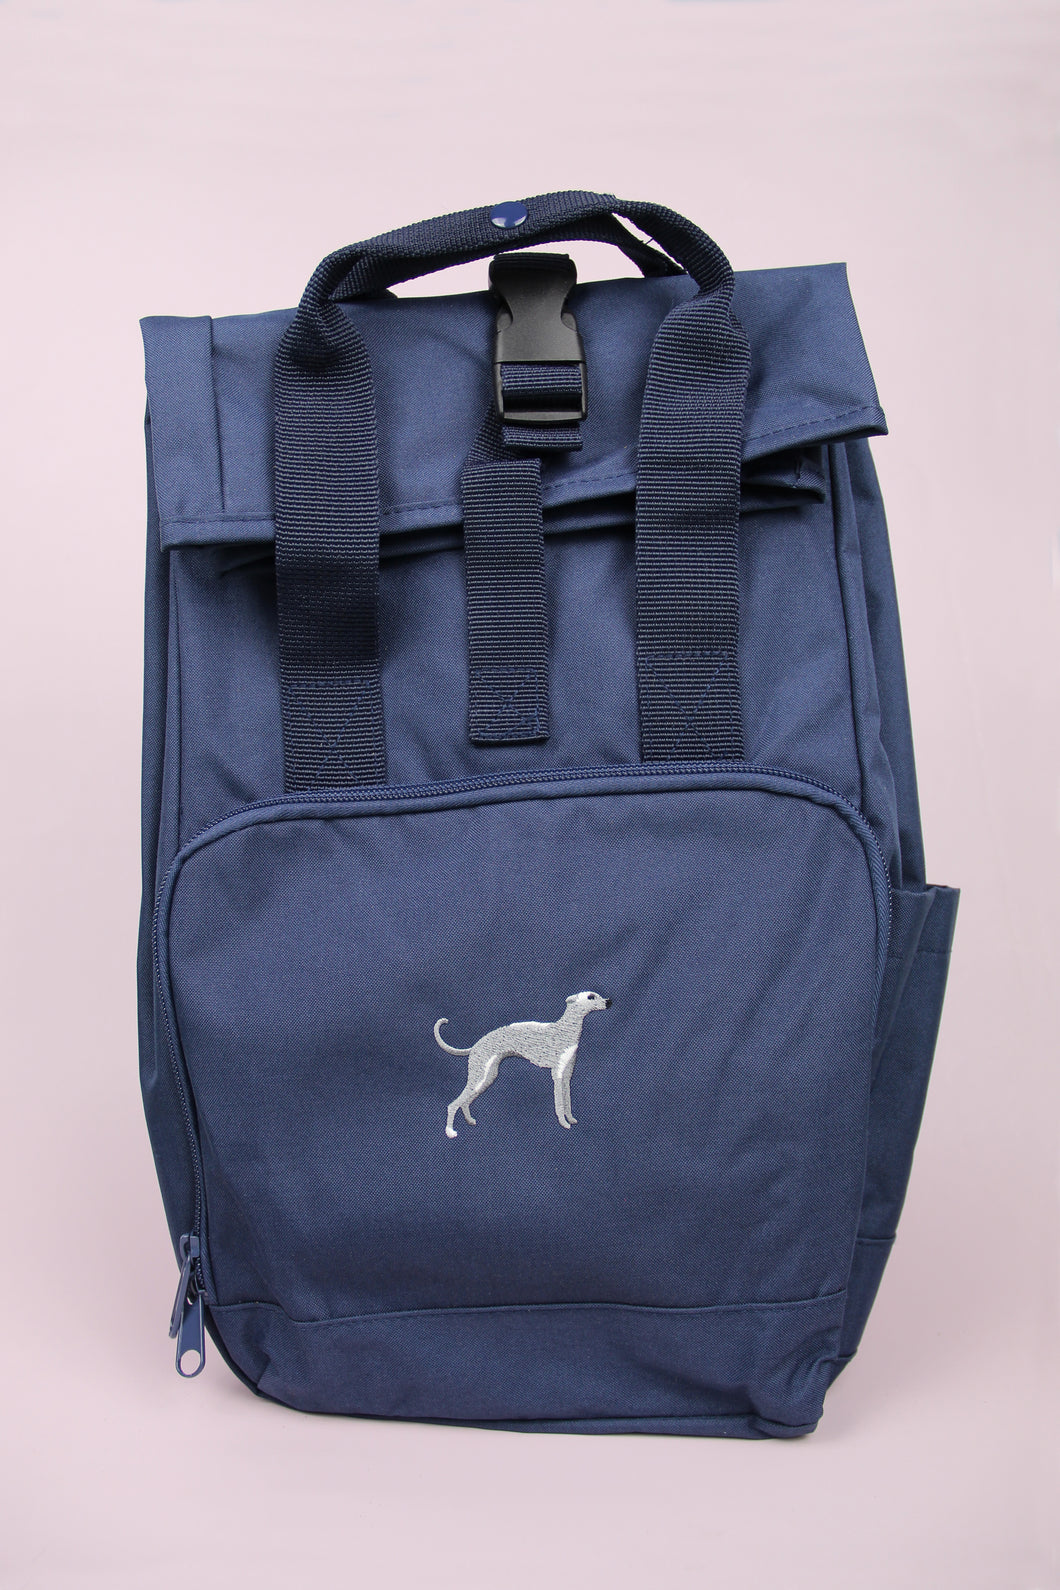 Greyhound Recycled Backpack - Navy